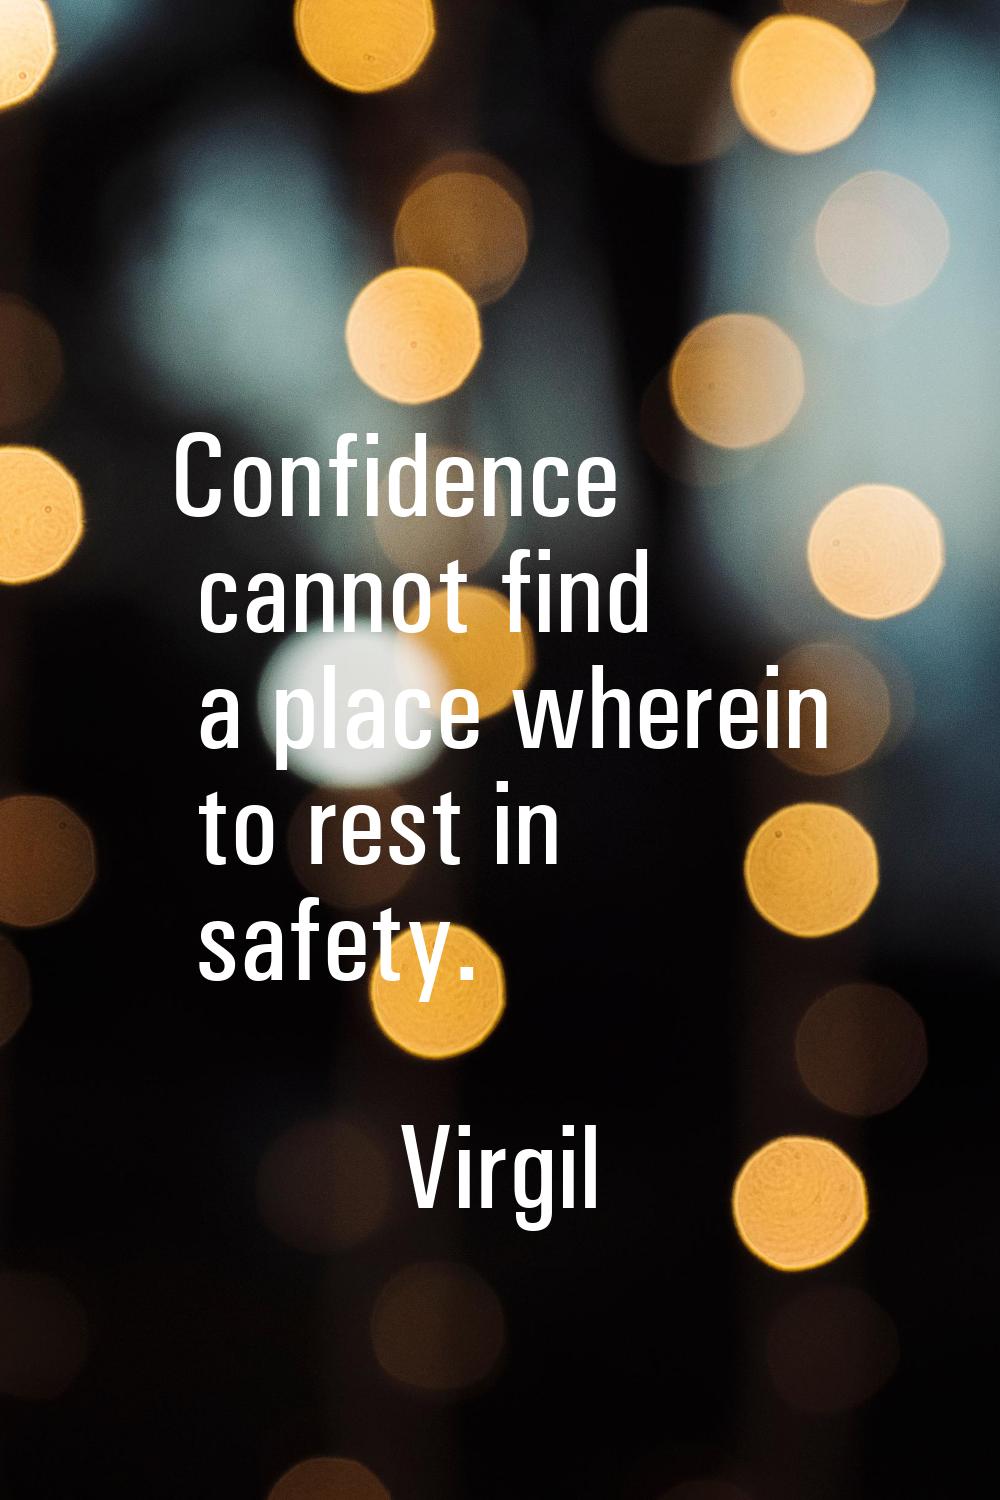 Confidence cannot find a place wherein to rest in safety.